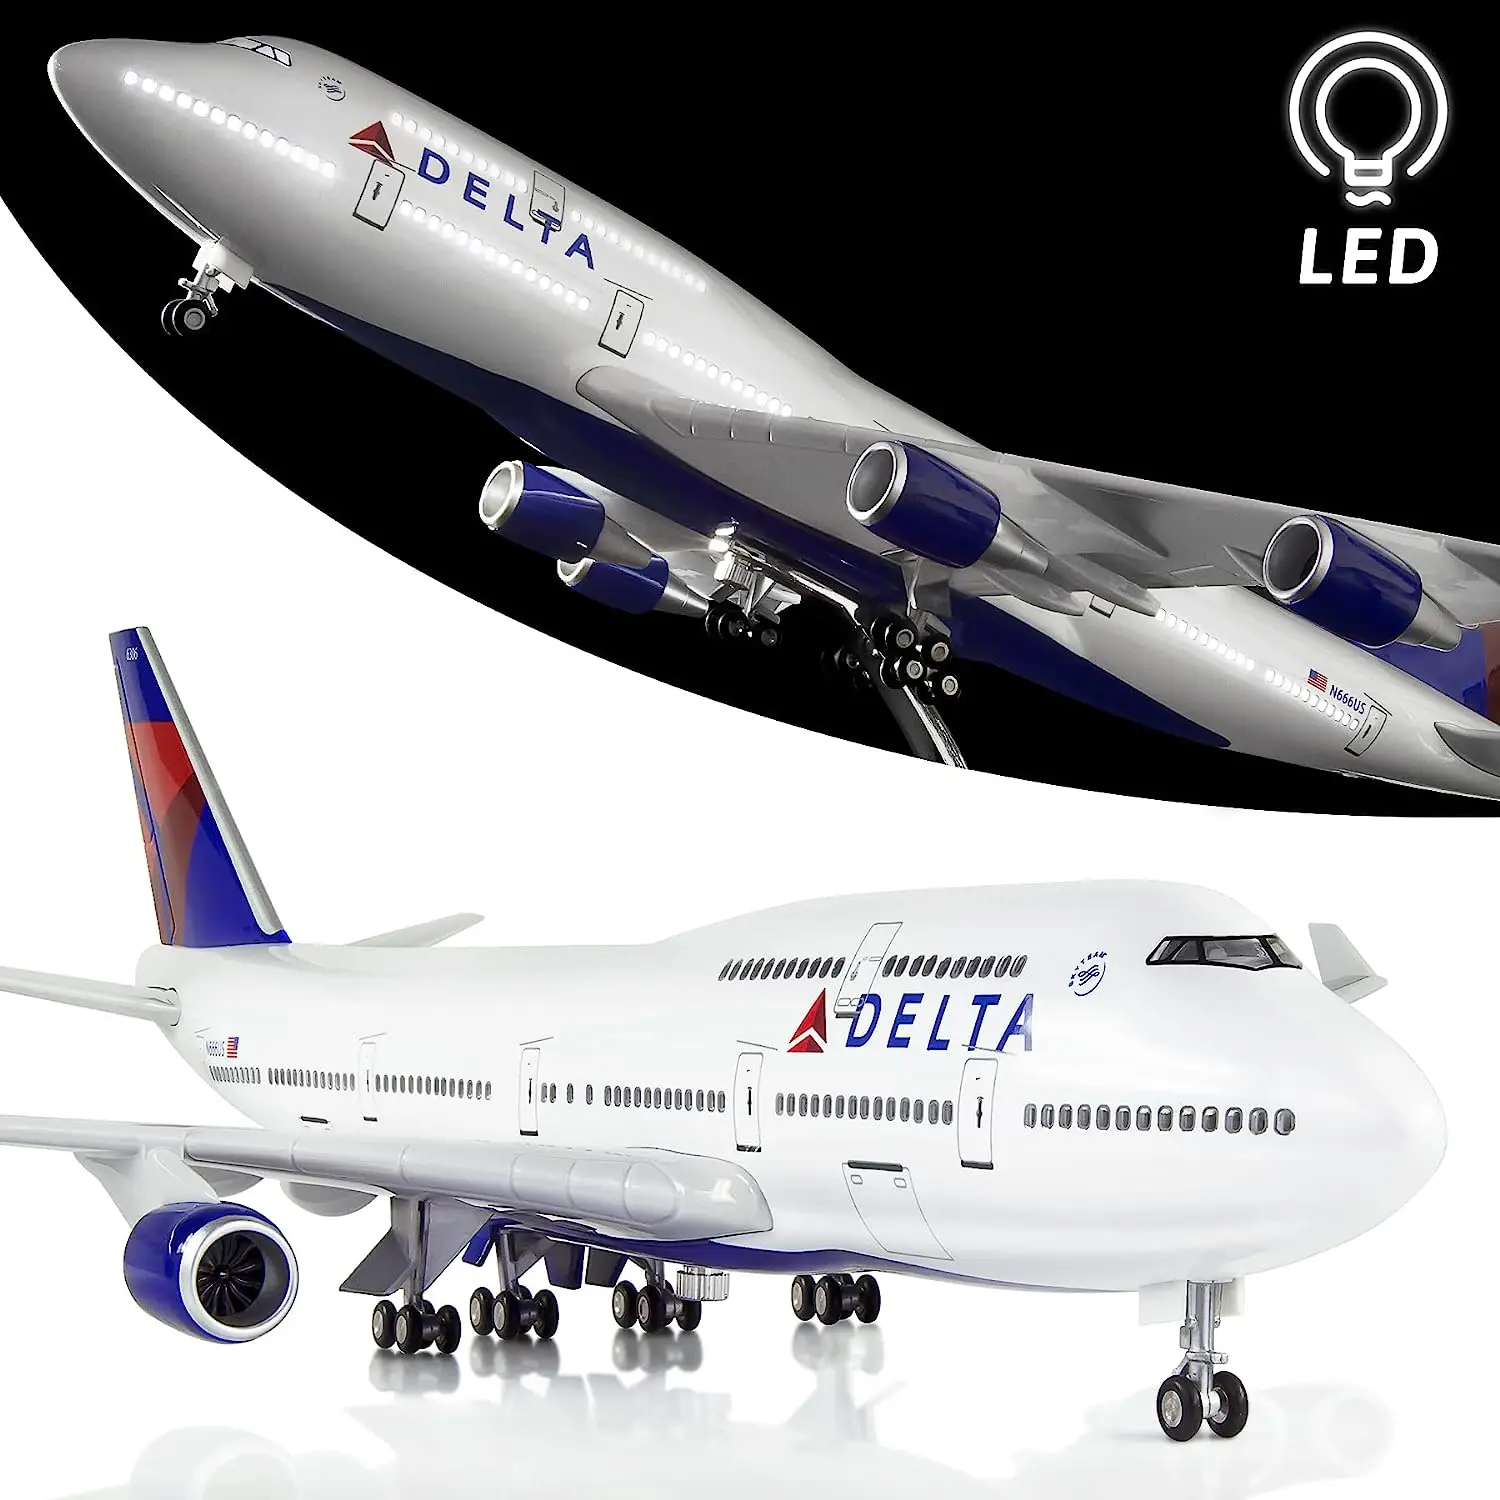 

1/150 Scale 47cm Airplane 747 B747 Aircraft DELTA Airline Model W Light and Wheel Diecast Resin Plane For Collection